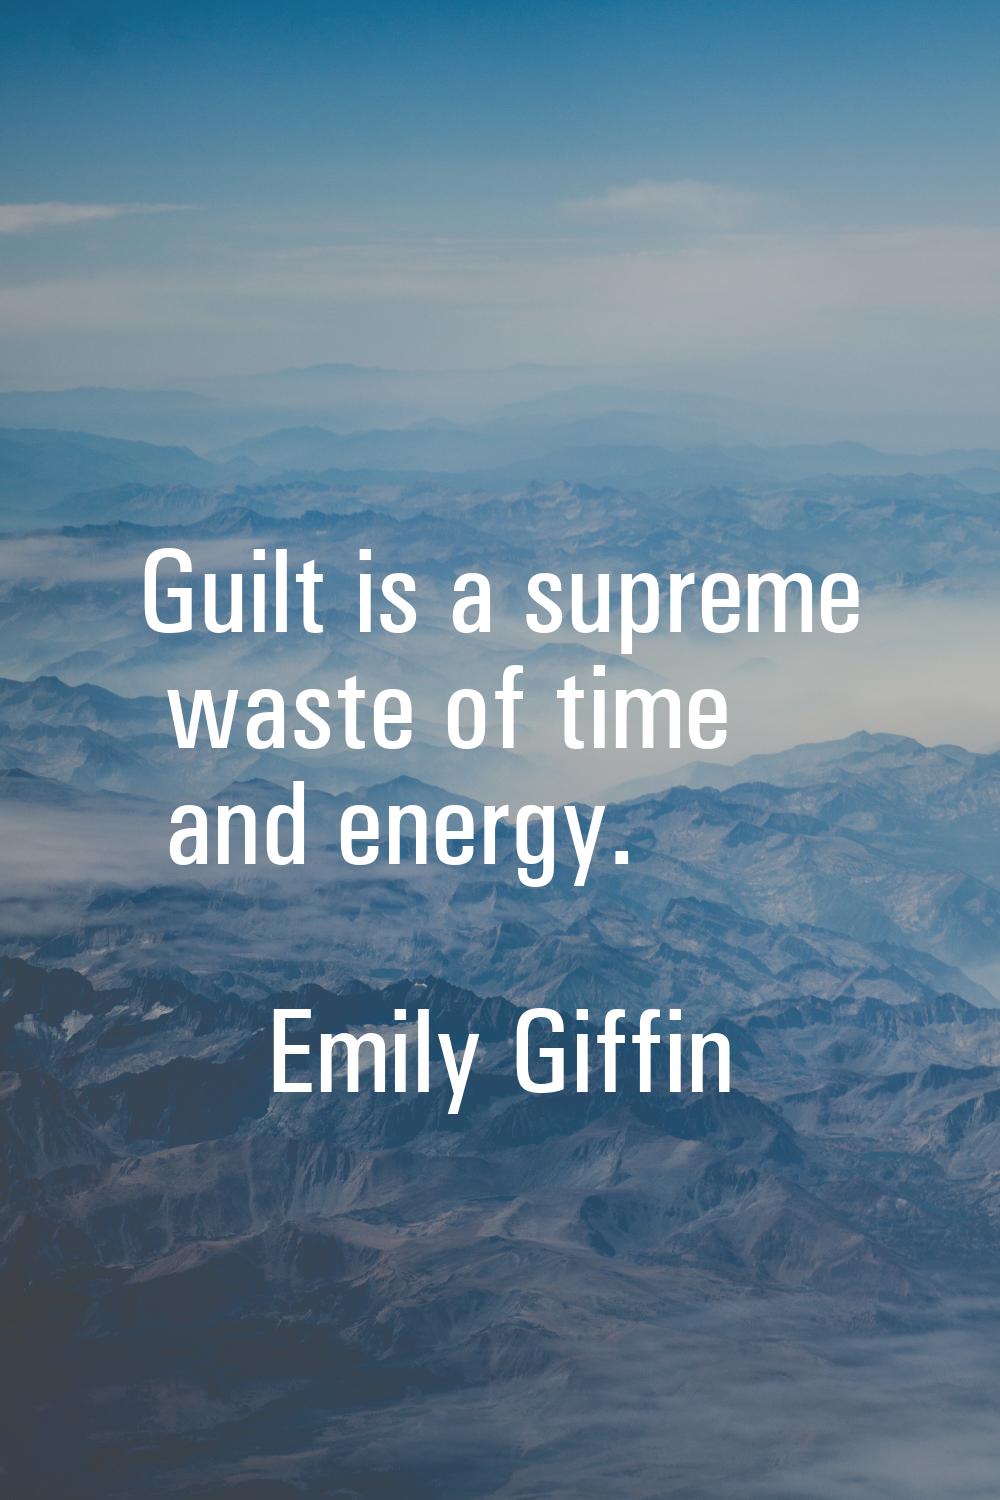 Guilt is a supreme waste of time and energy.